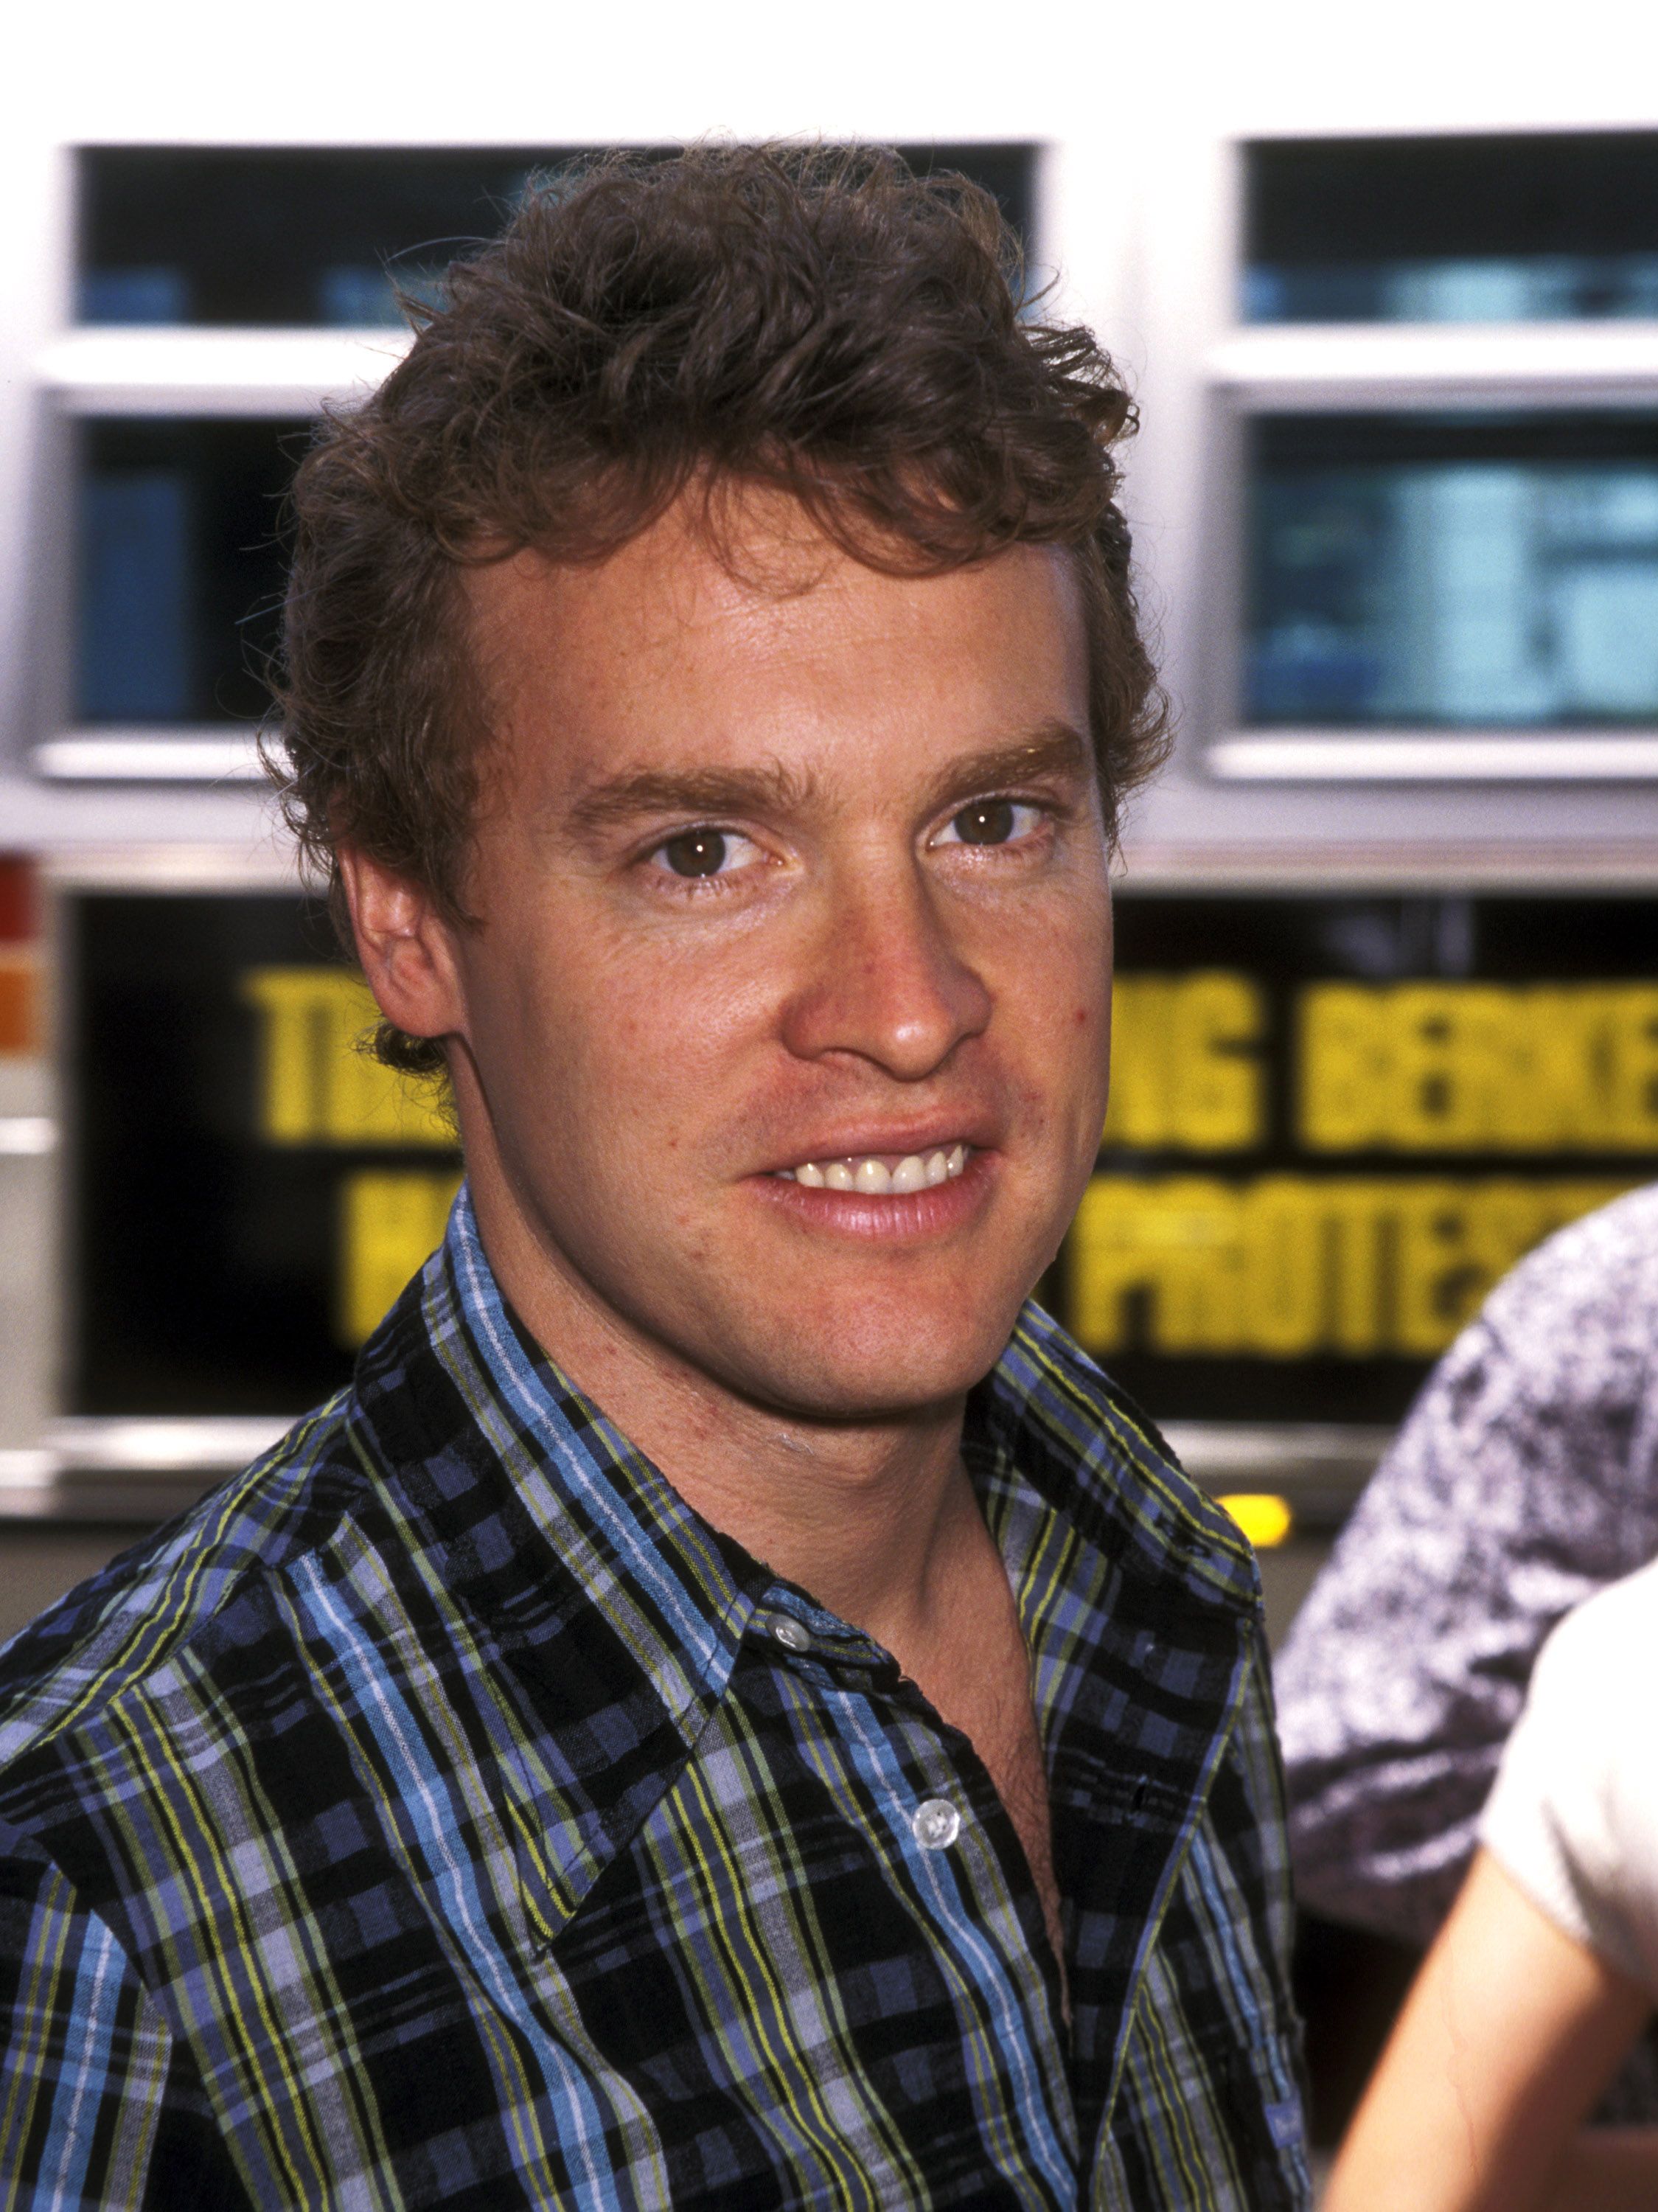 Tate Donovan attends the premiere of Walt Disney's "Hercules" at El Capitan Theater in Hollywood, California, United States. | Source: Getty Images